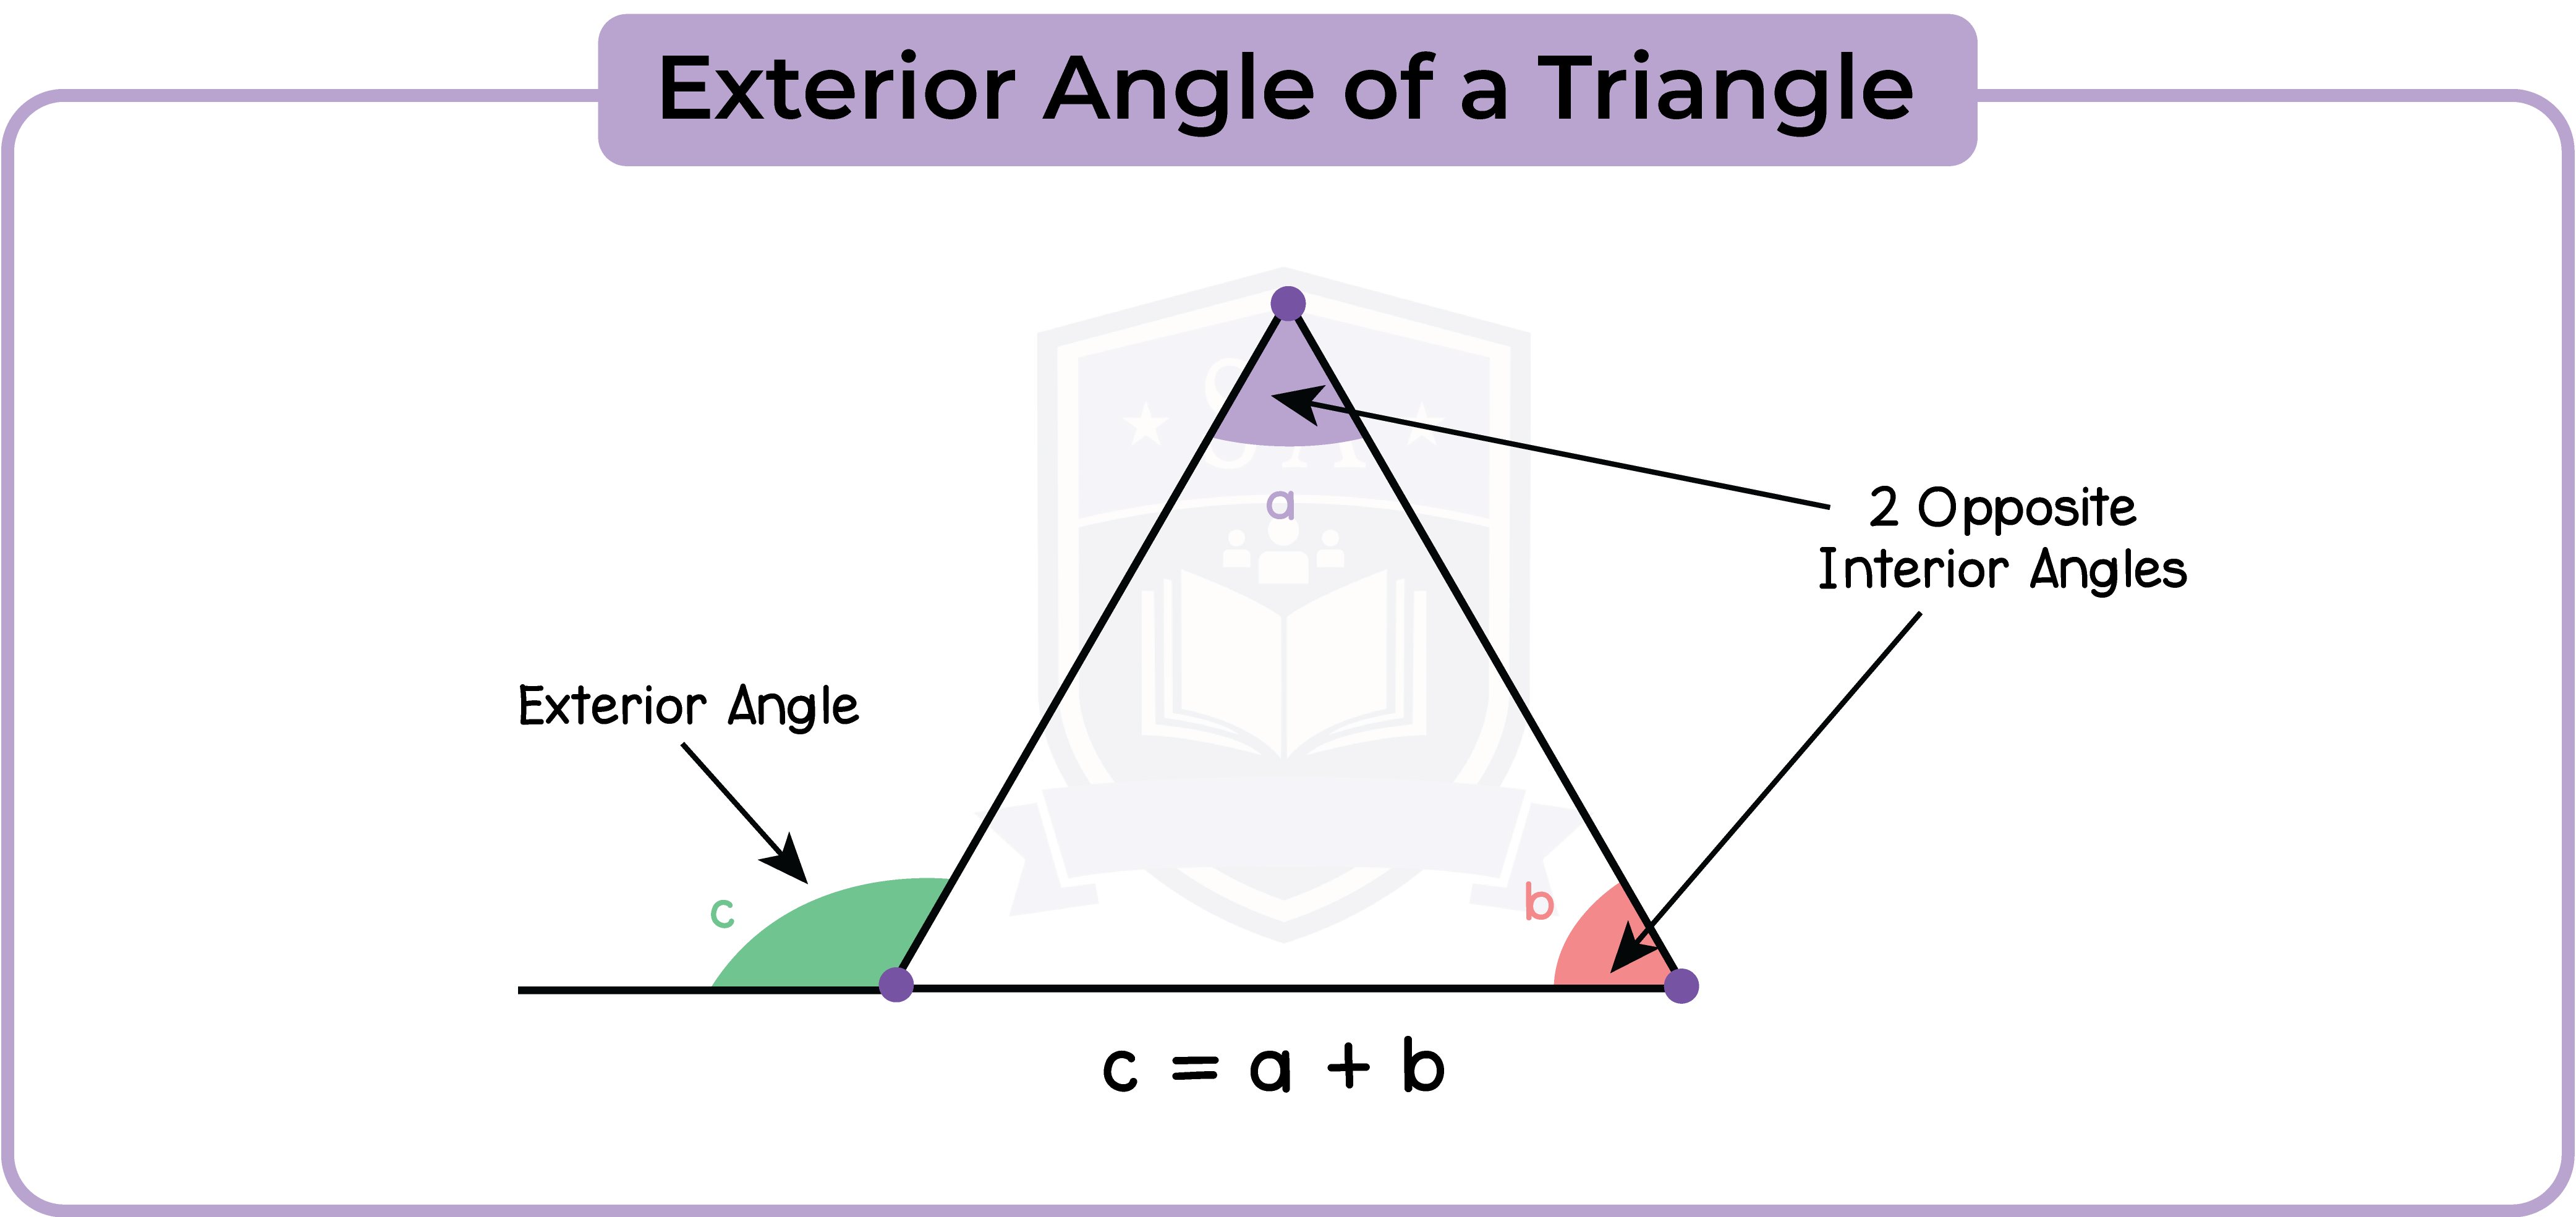 edexcel_igcse_mathematics a_topic 25_angles, lines and triangles_003_Exterior Angle of a Triangle